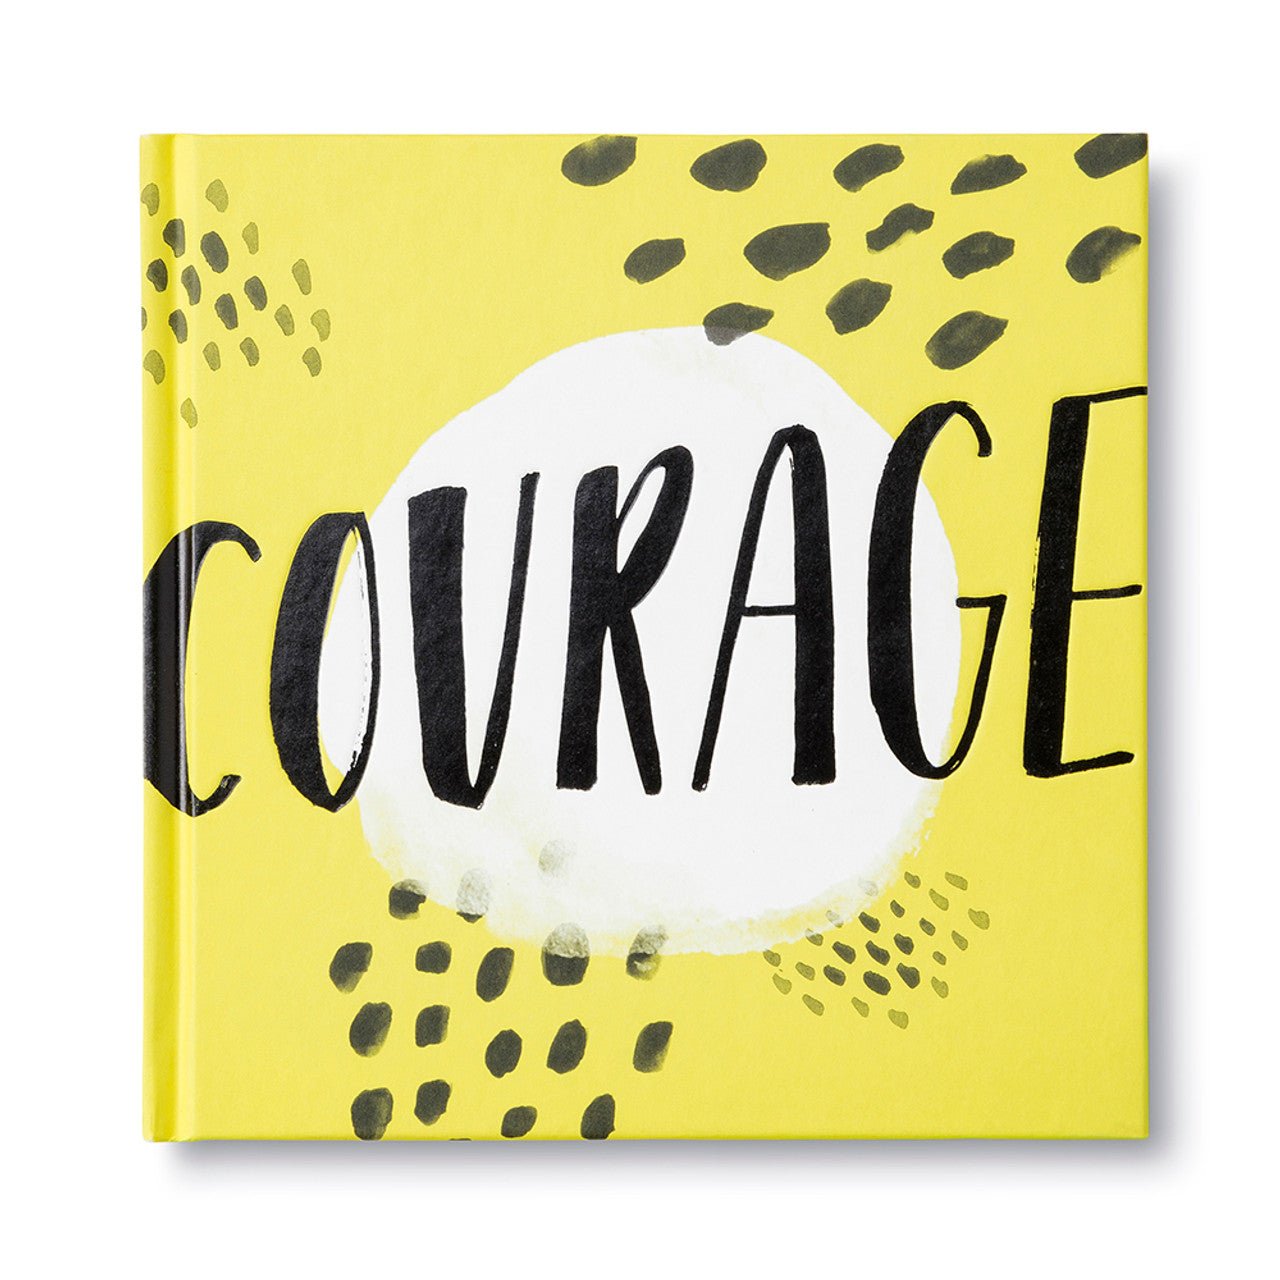 Courage - A Book For Big Risks and Quiet Dreams - The Kindness Cause